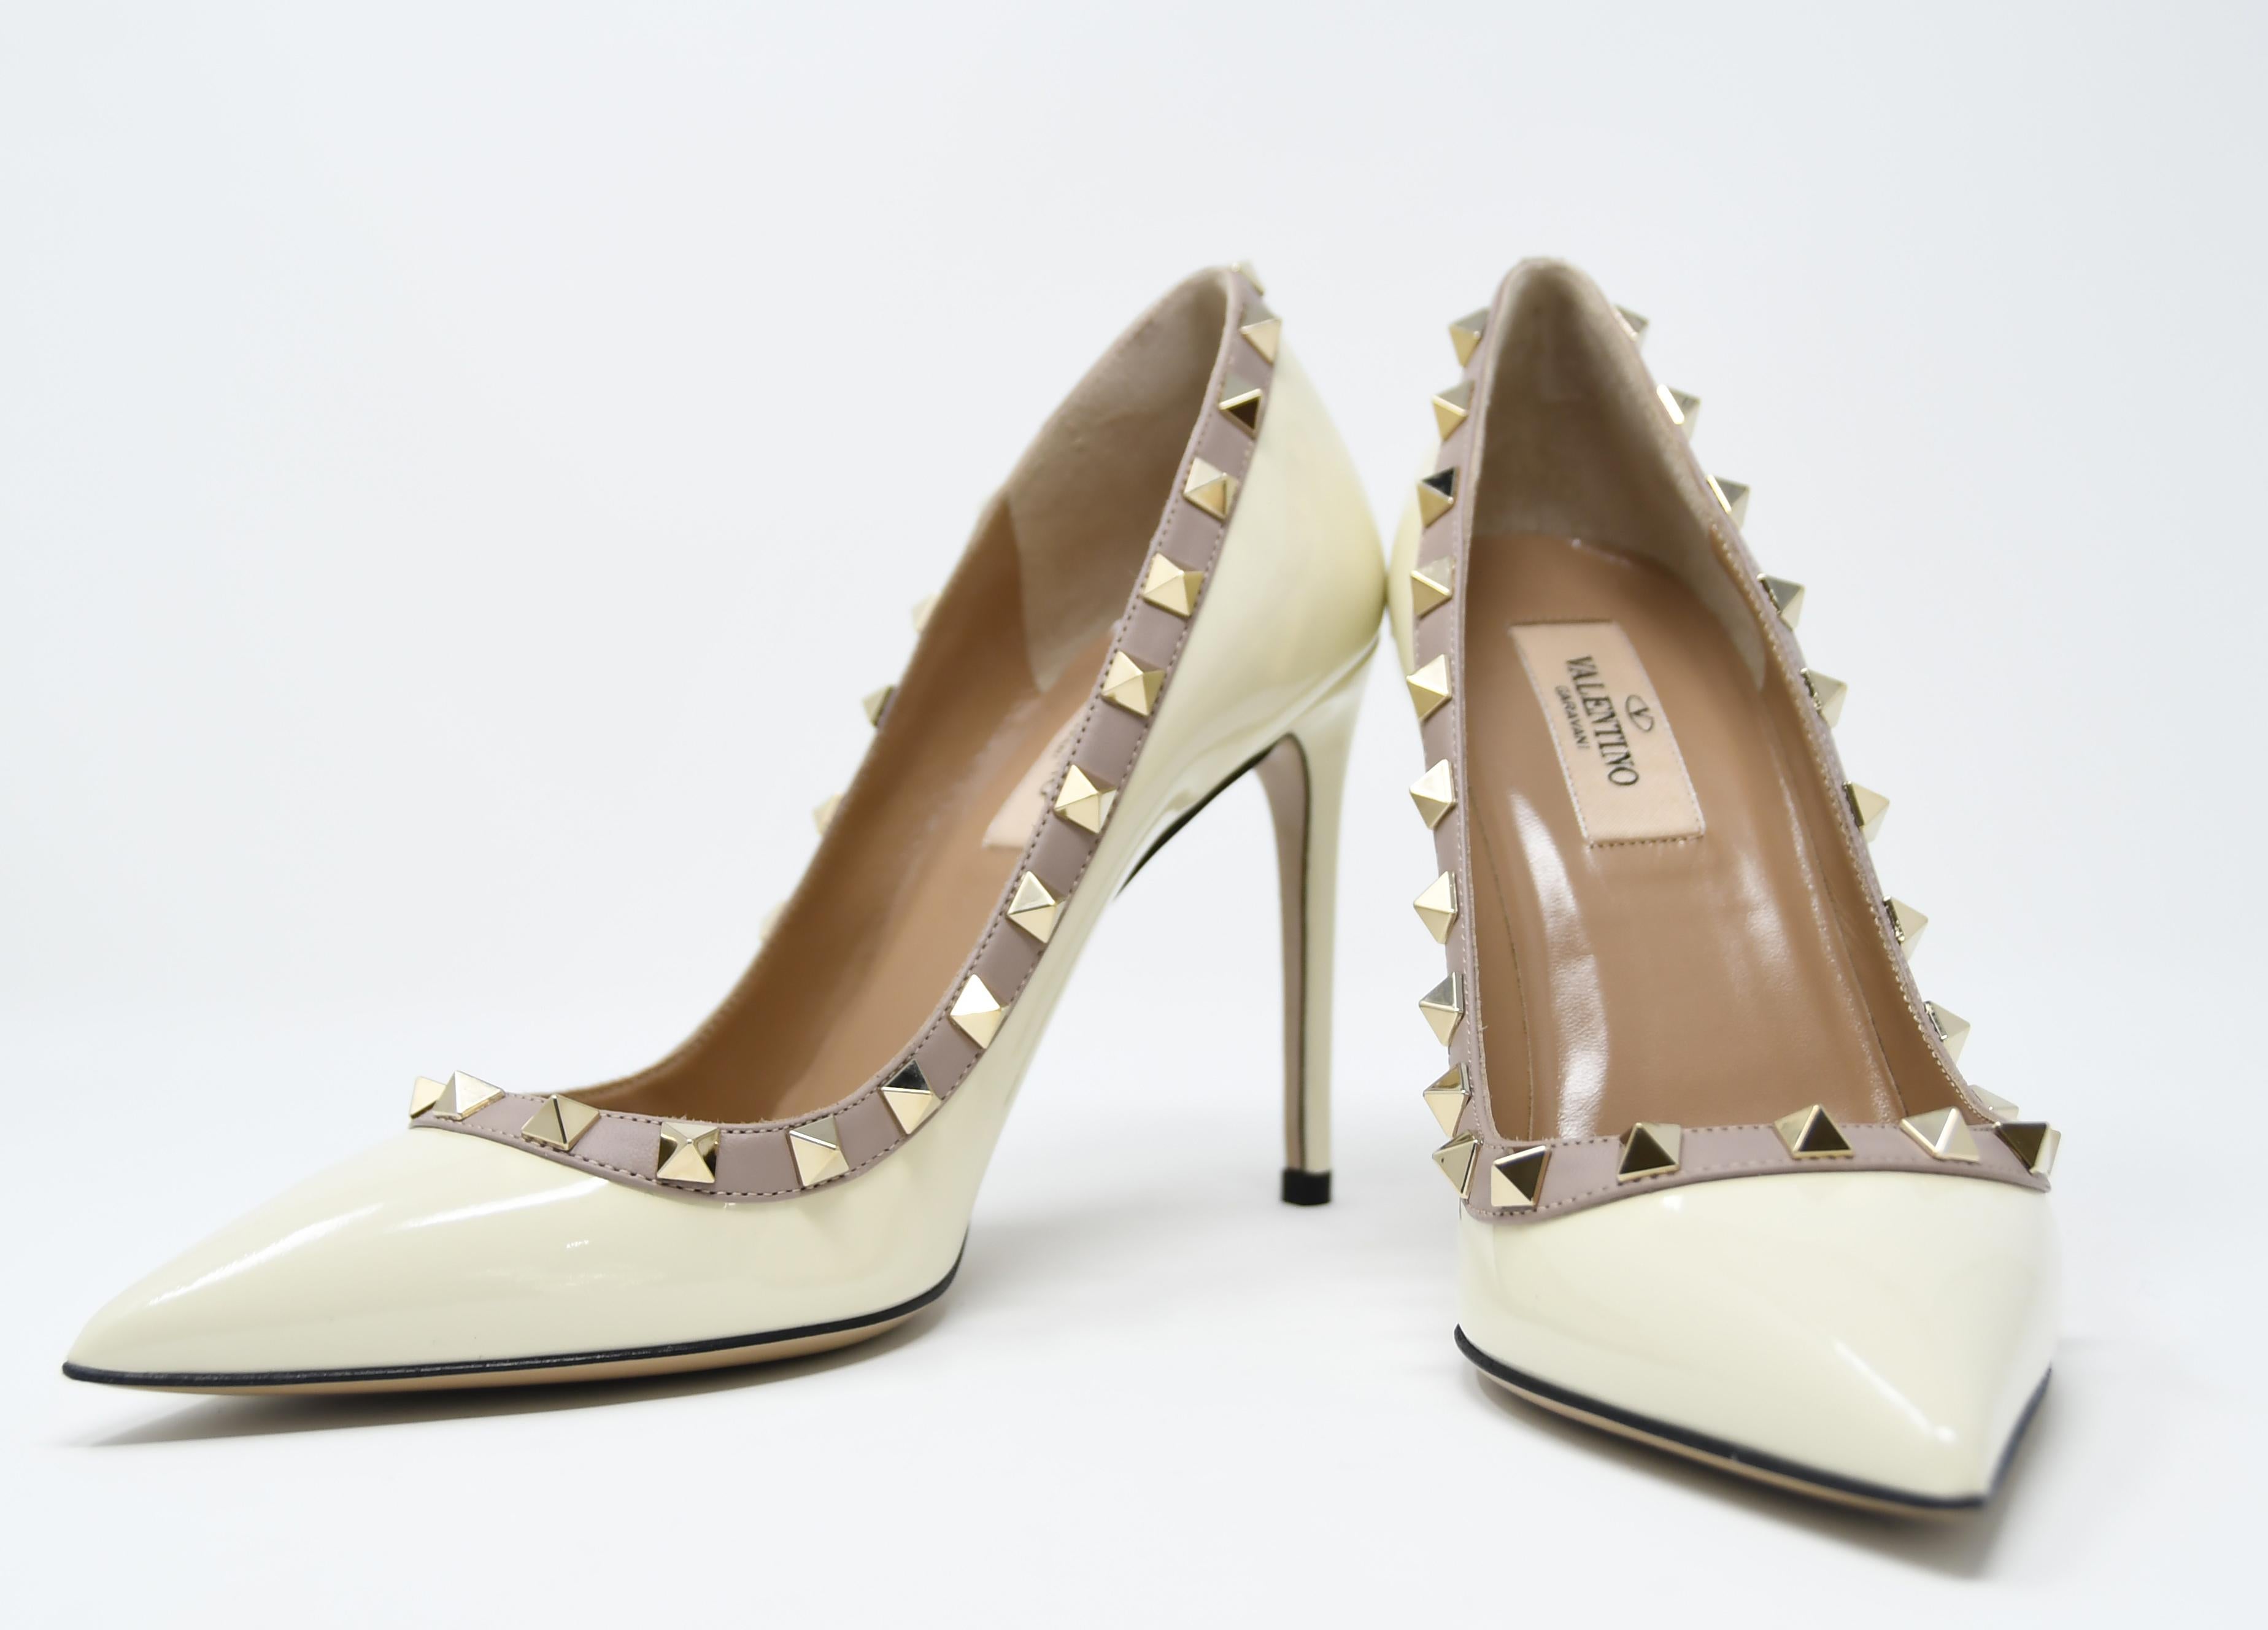 Valentino Rock Stud Off White Patent Leather Pumps - Size 36 1/2 In New Condition For Sale In Newport, RI